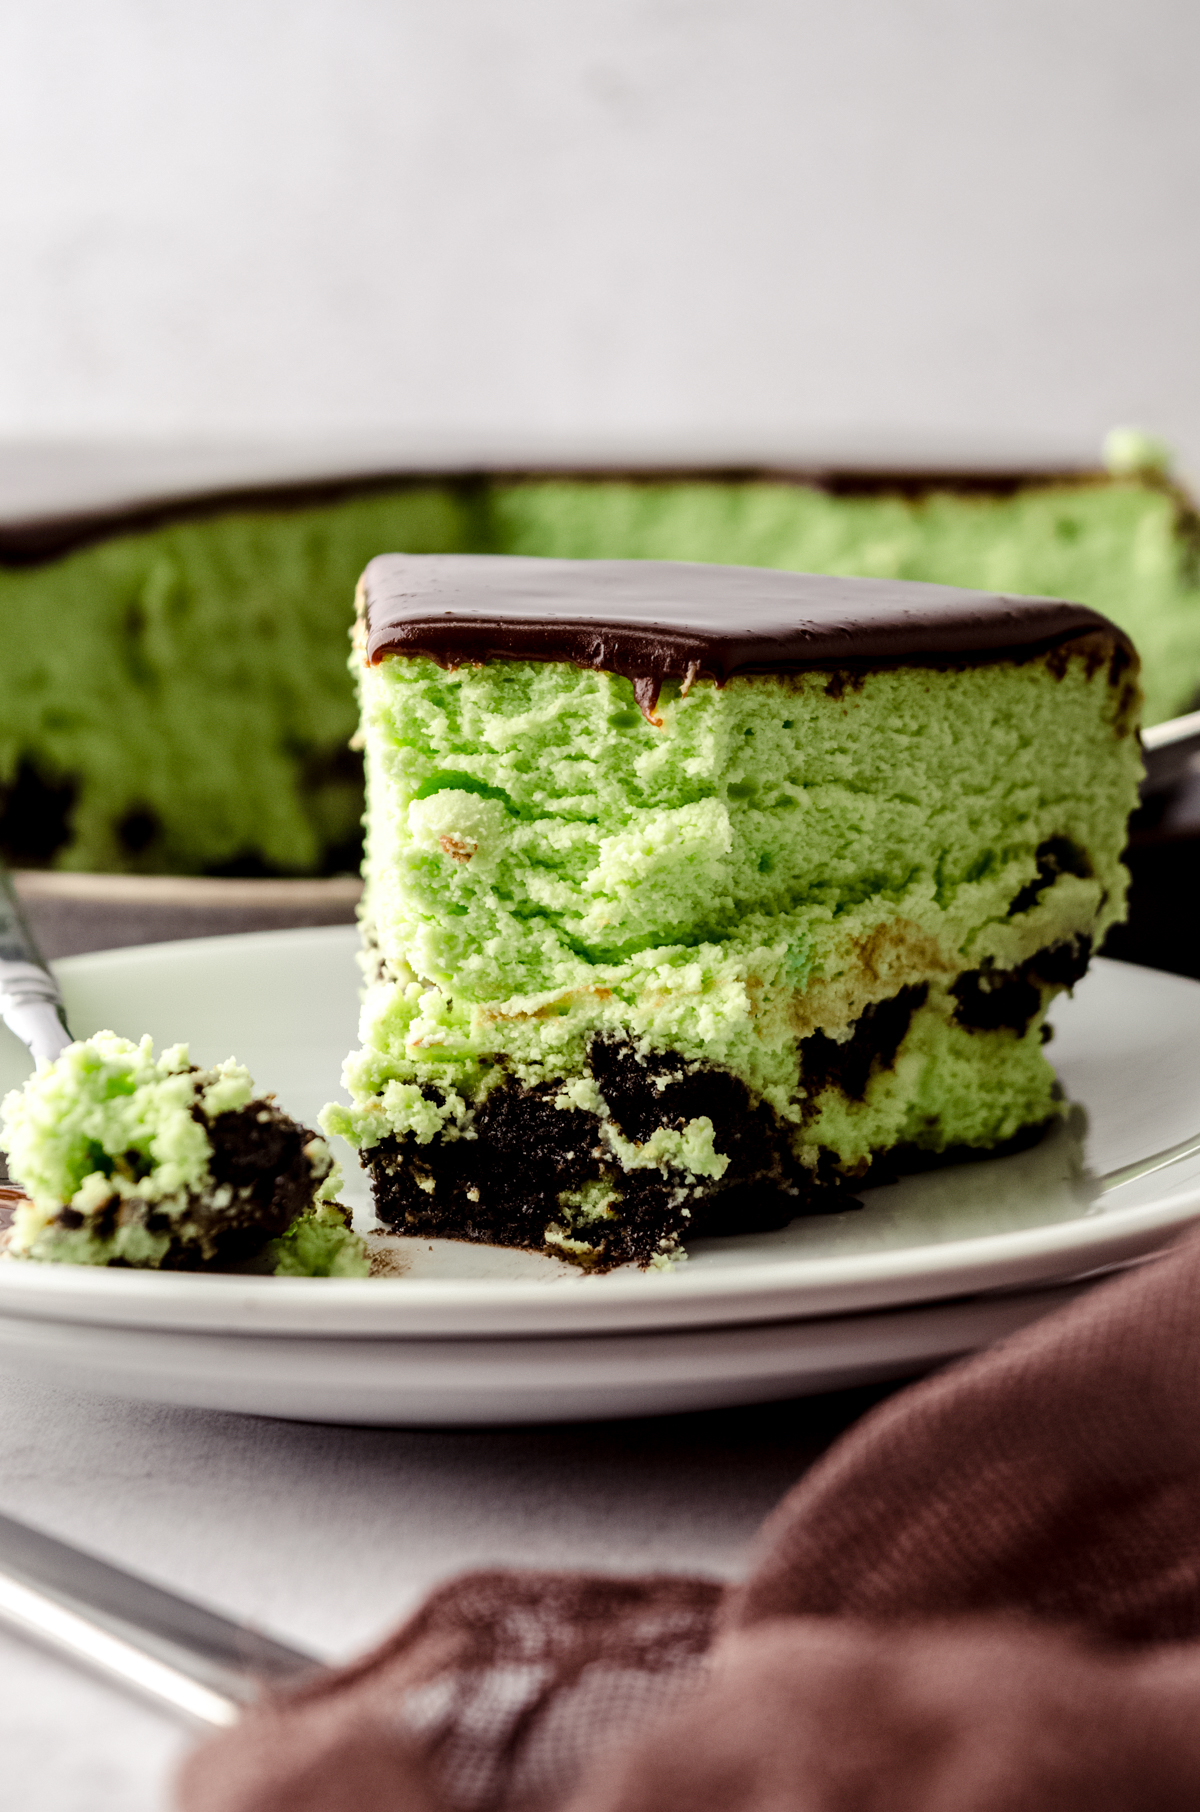 A slice of mint chocolate cheesecake on a plate with a fork. A bite has been taken out of it.